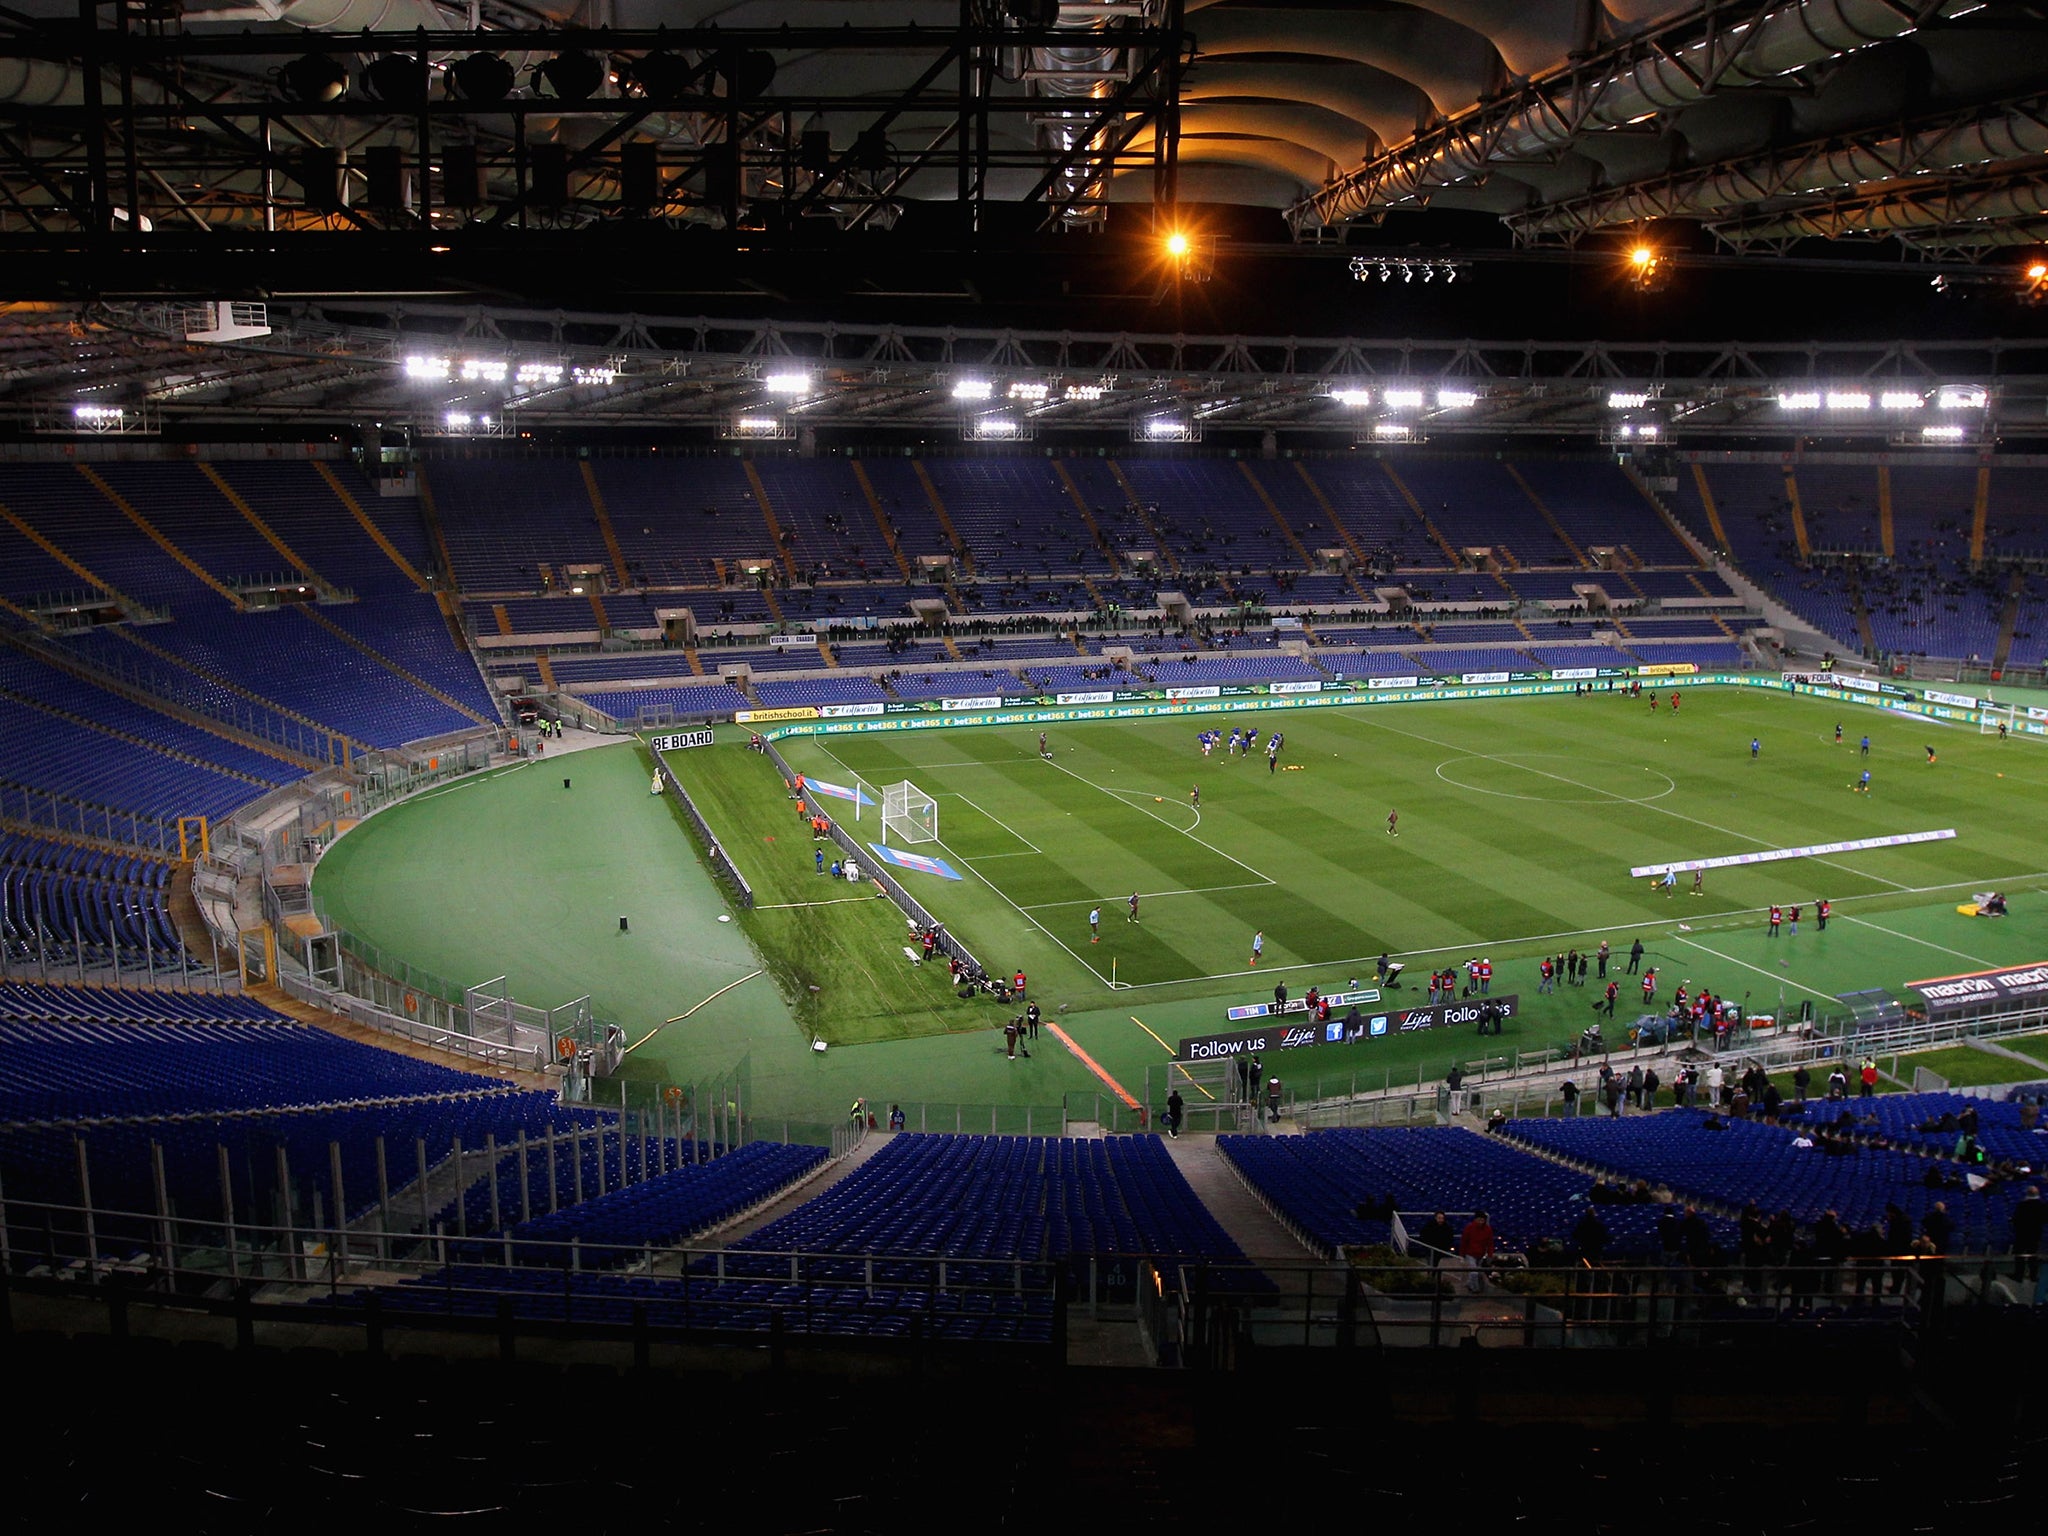 &#13;
Lazio had to play two games in a near-empty stadium after fans were banned because of racist abuse&#13;